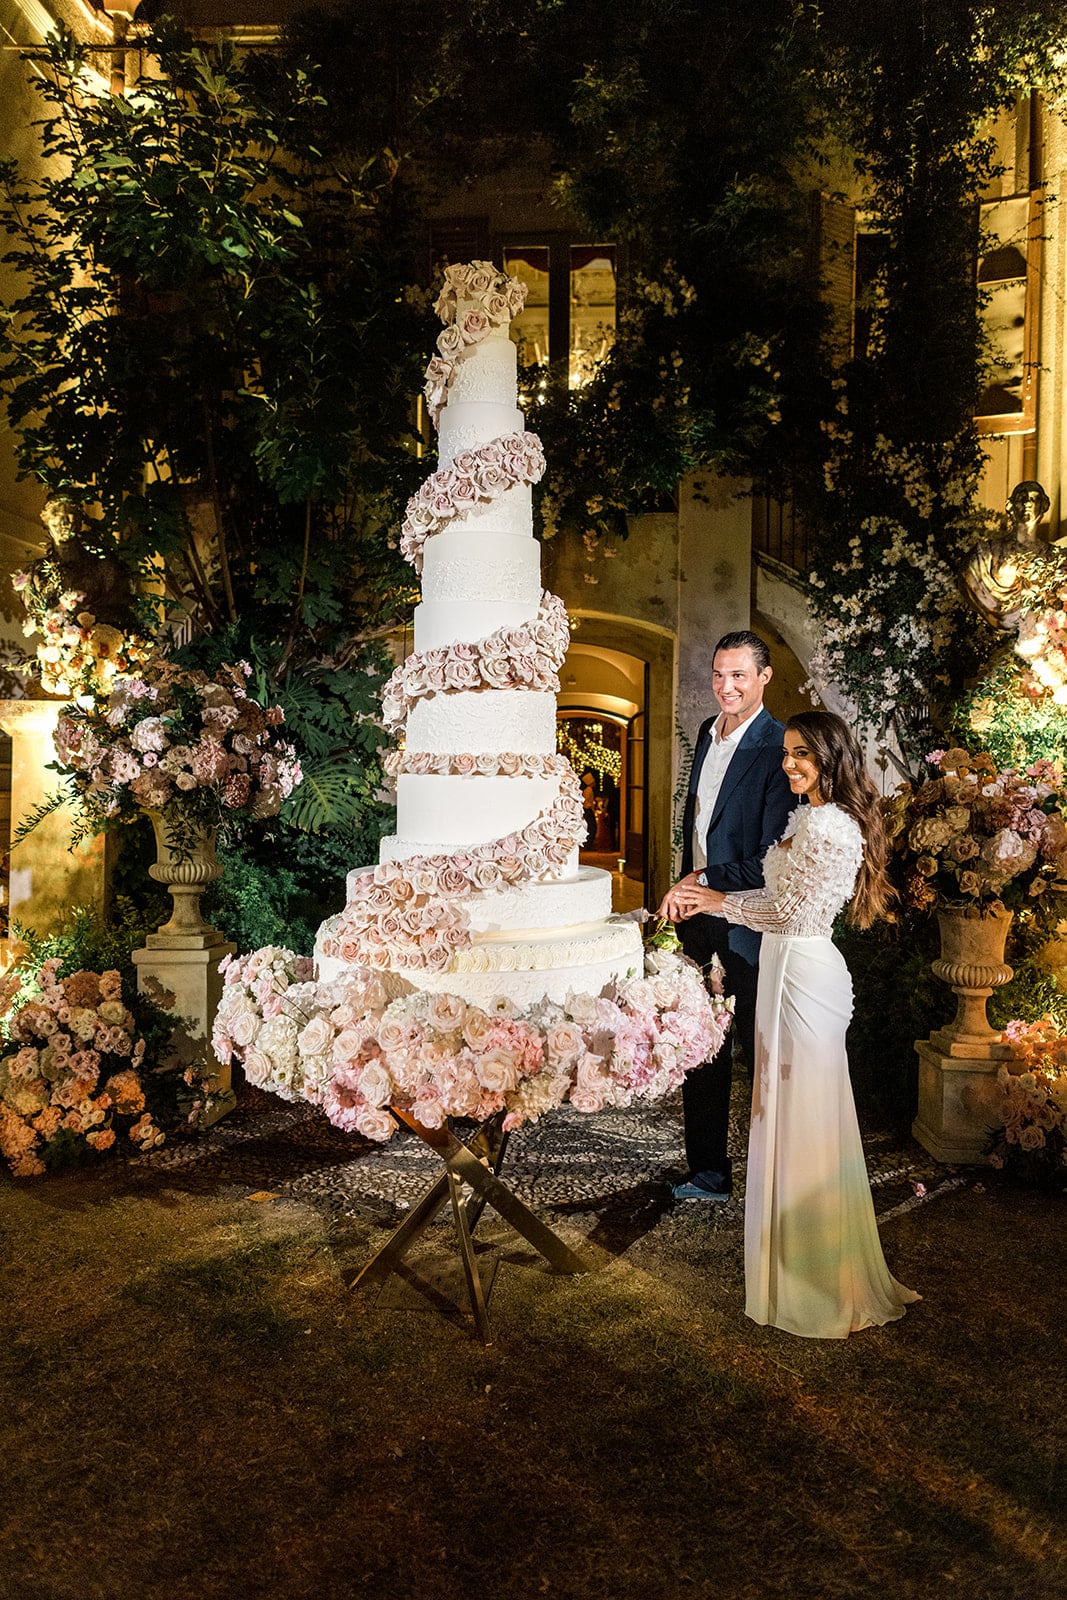 Bride and groom stand next to massive, 11-tiered wedding cake